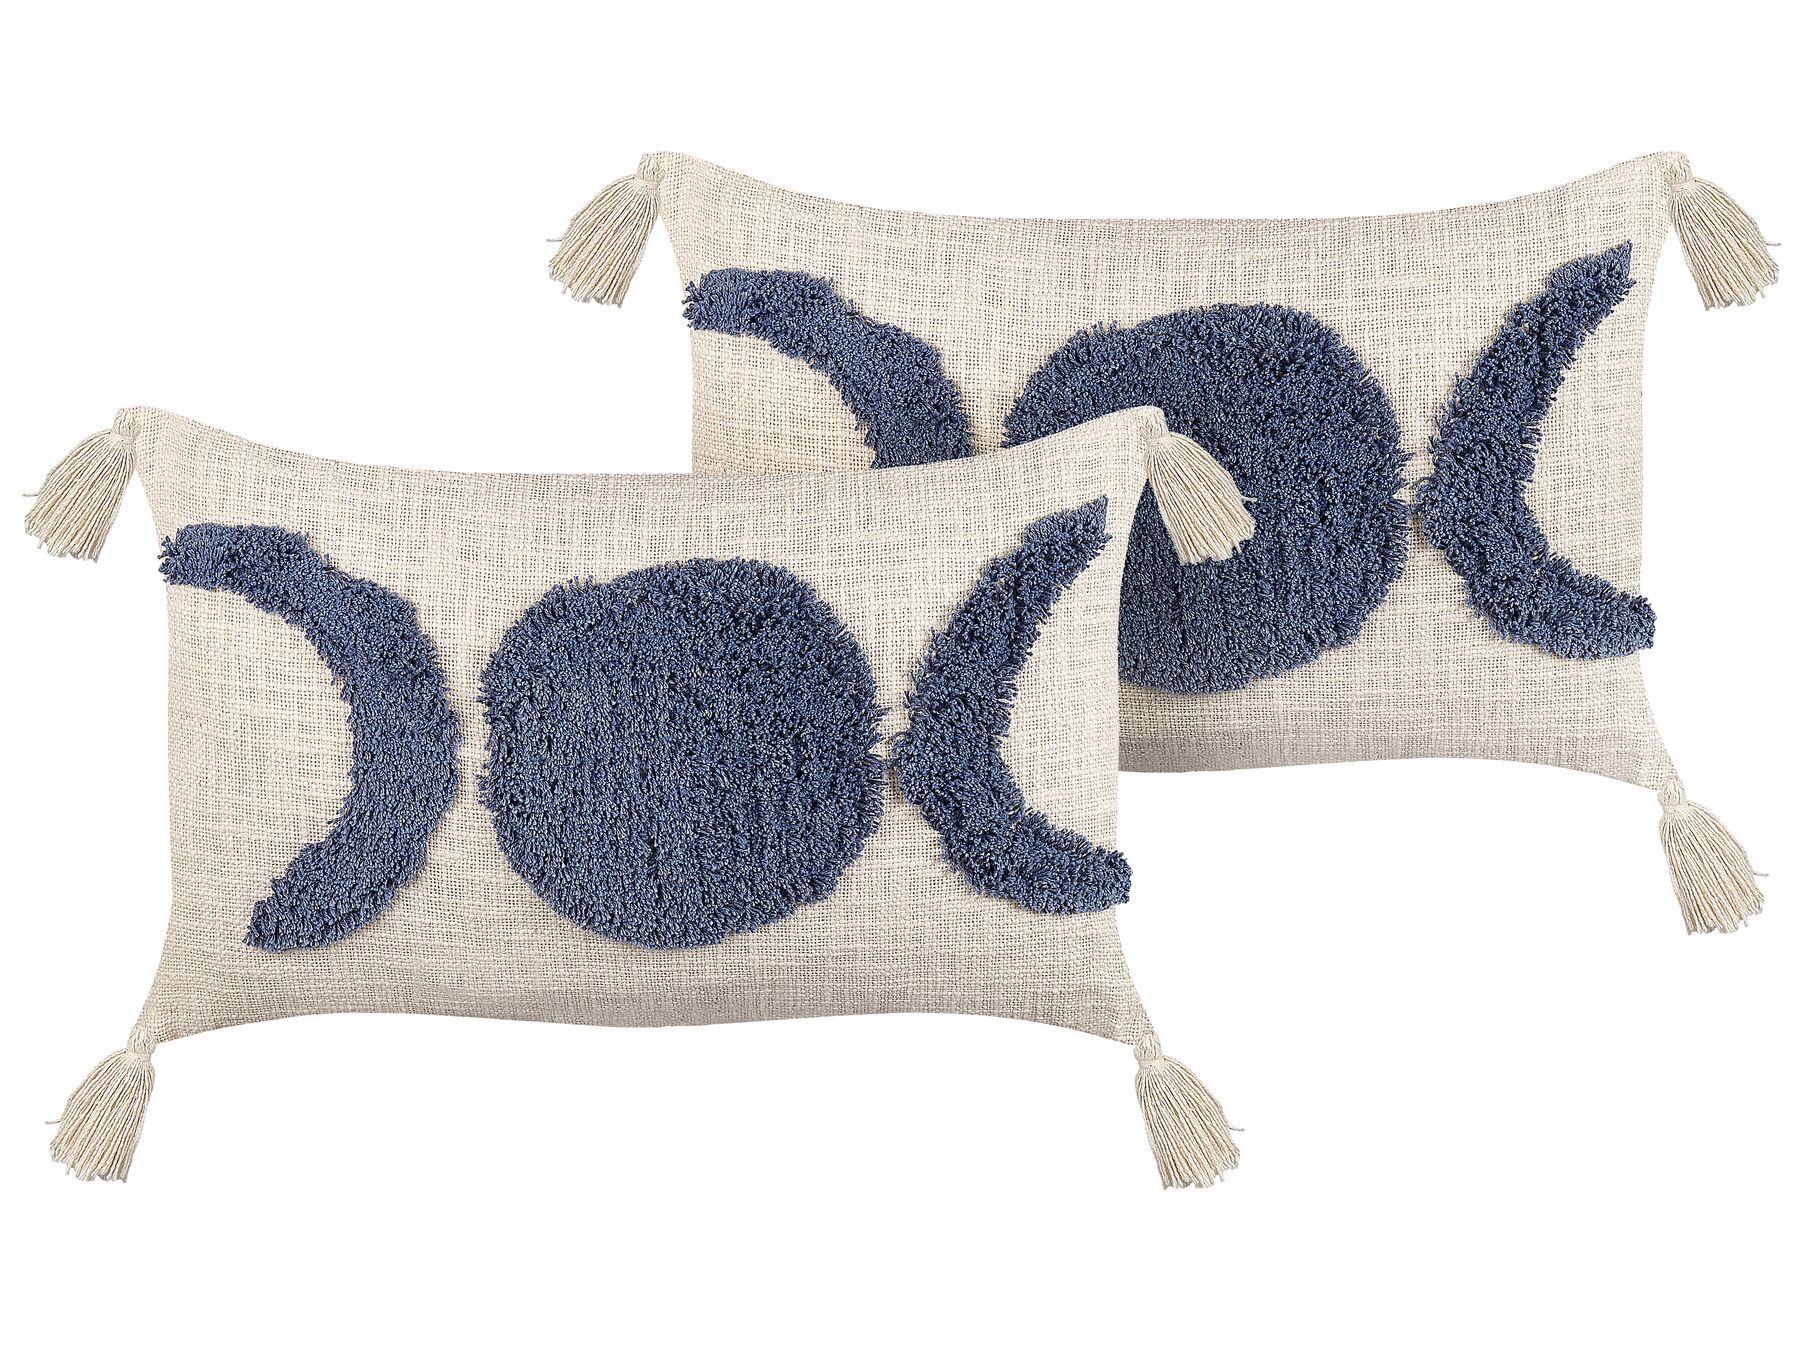 Set of 2 Tufted Cotton Cushions with Tassels 35 x 55 cm Beige and Blue LUPINUS_838987